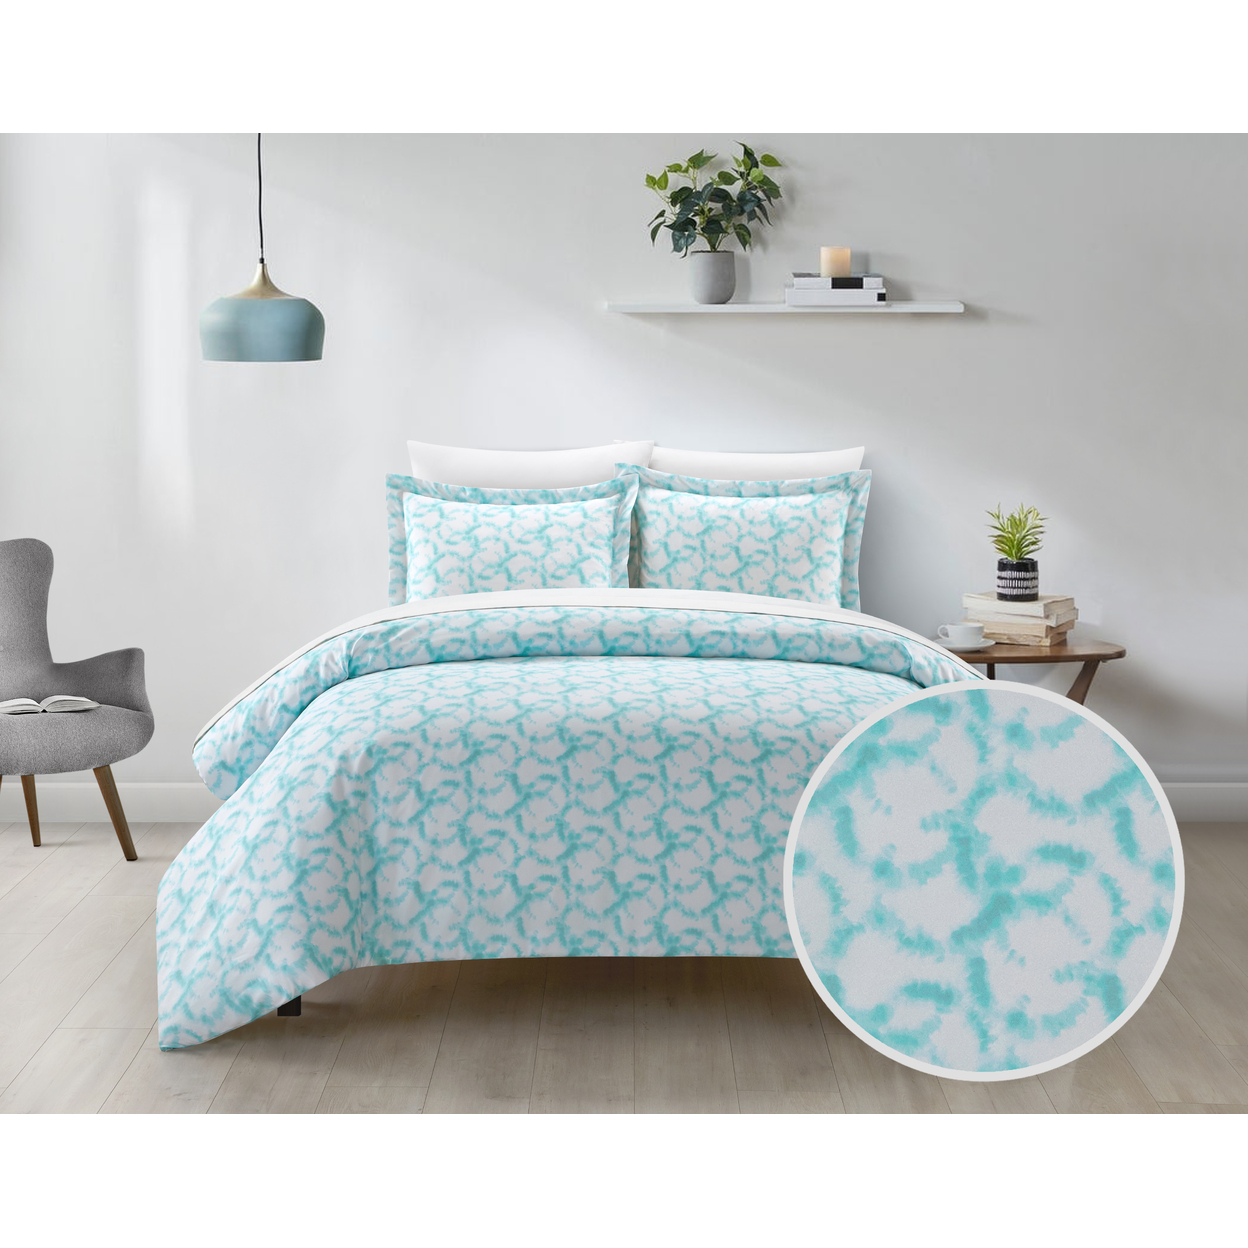 Khrissie 2 Or 3 Piece Duvet Cover Set Watercolor Overlapping Rings Pattern - Aqua, King